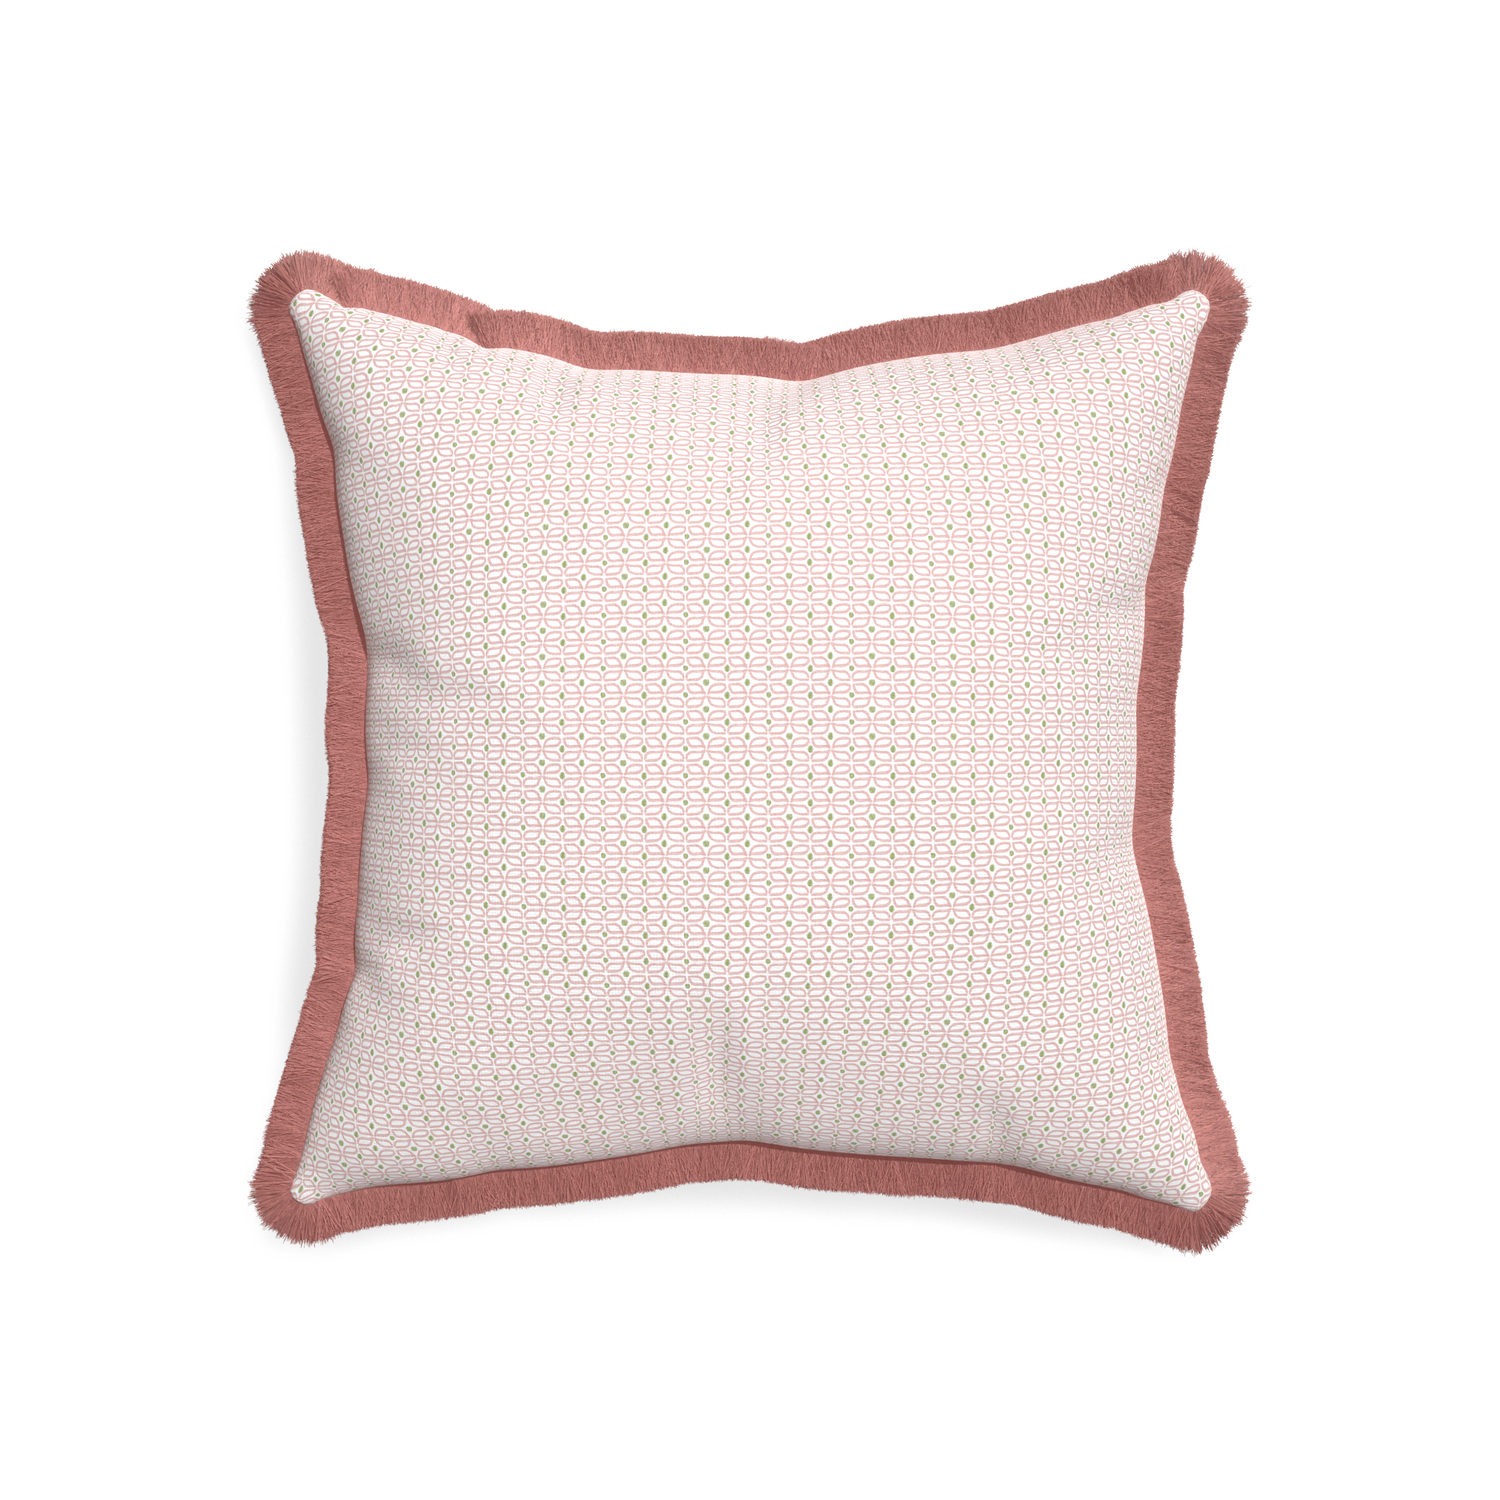 20-square loomi pink custom pink geometricpillow with d fringe on white background